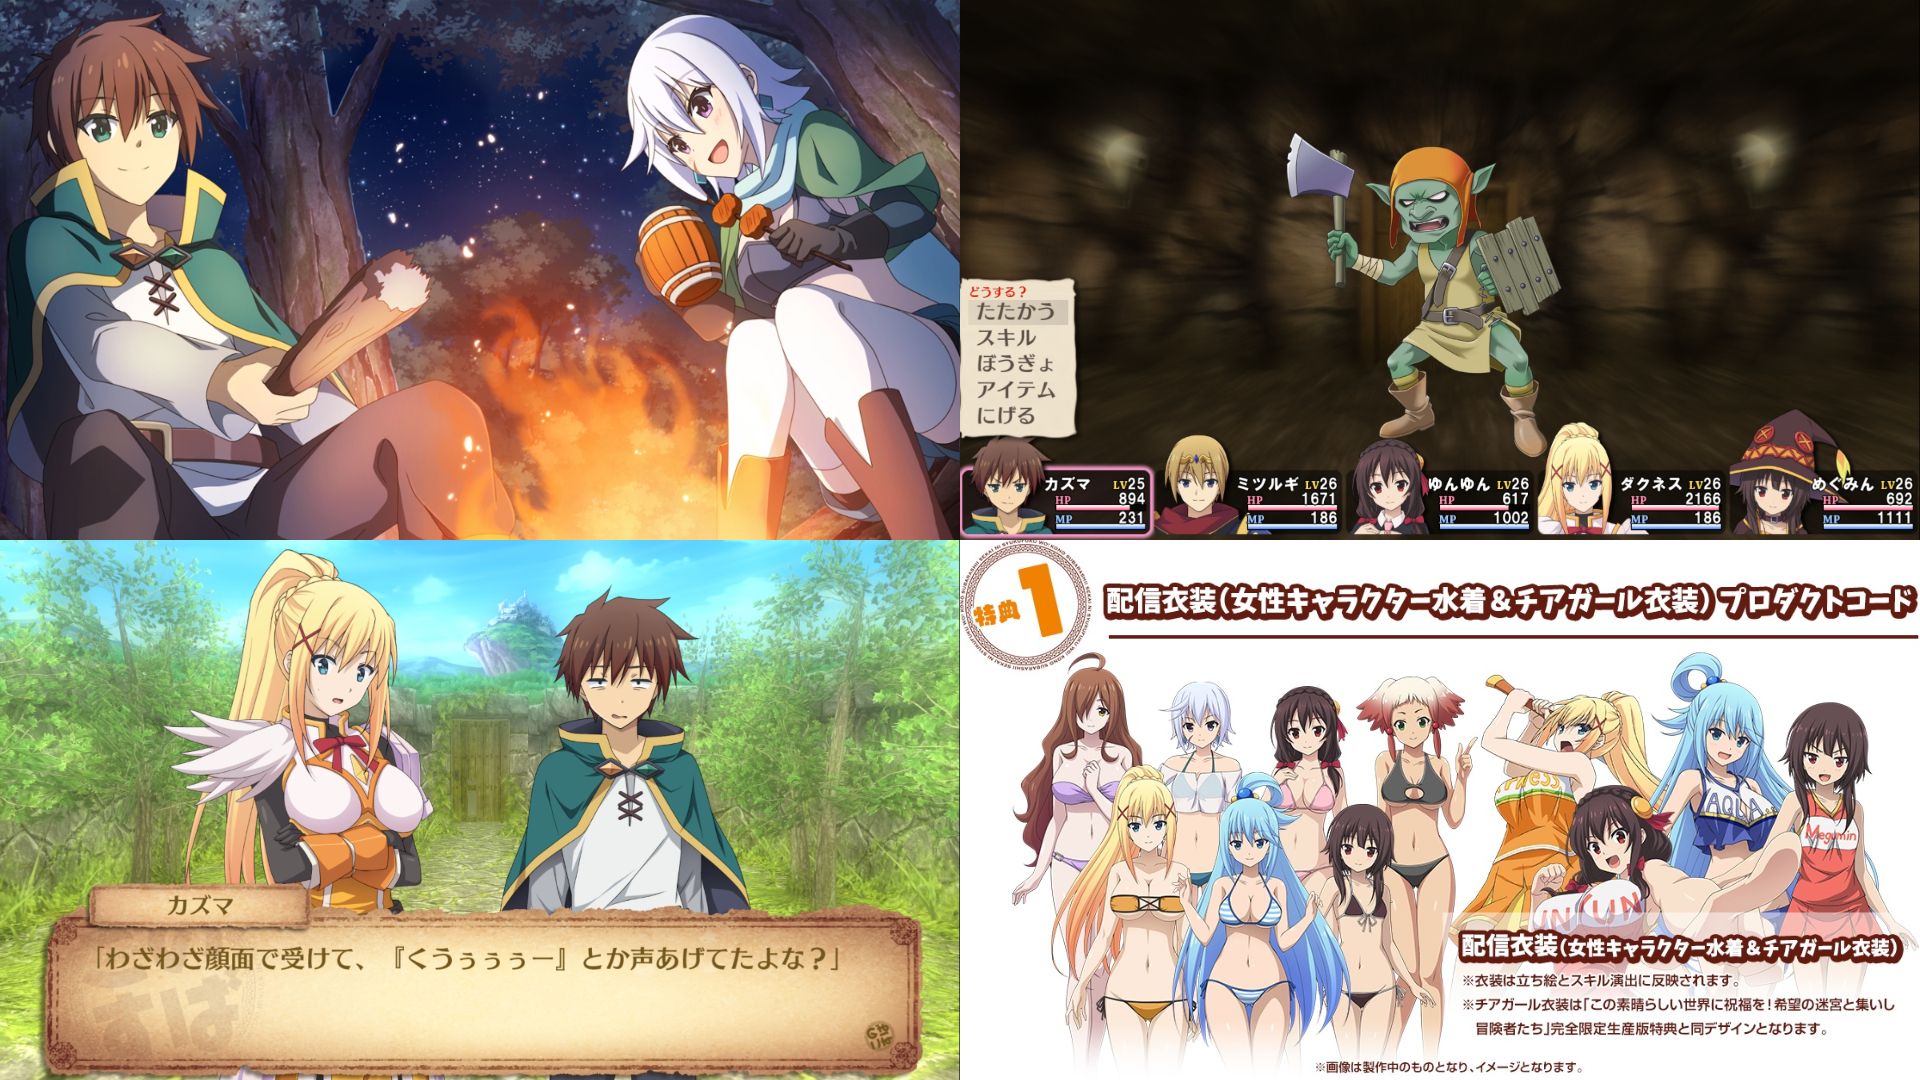 New Konosuba Dungeon RPG Delayed from July 28 to September 29